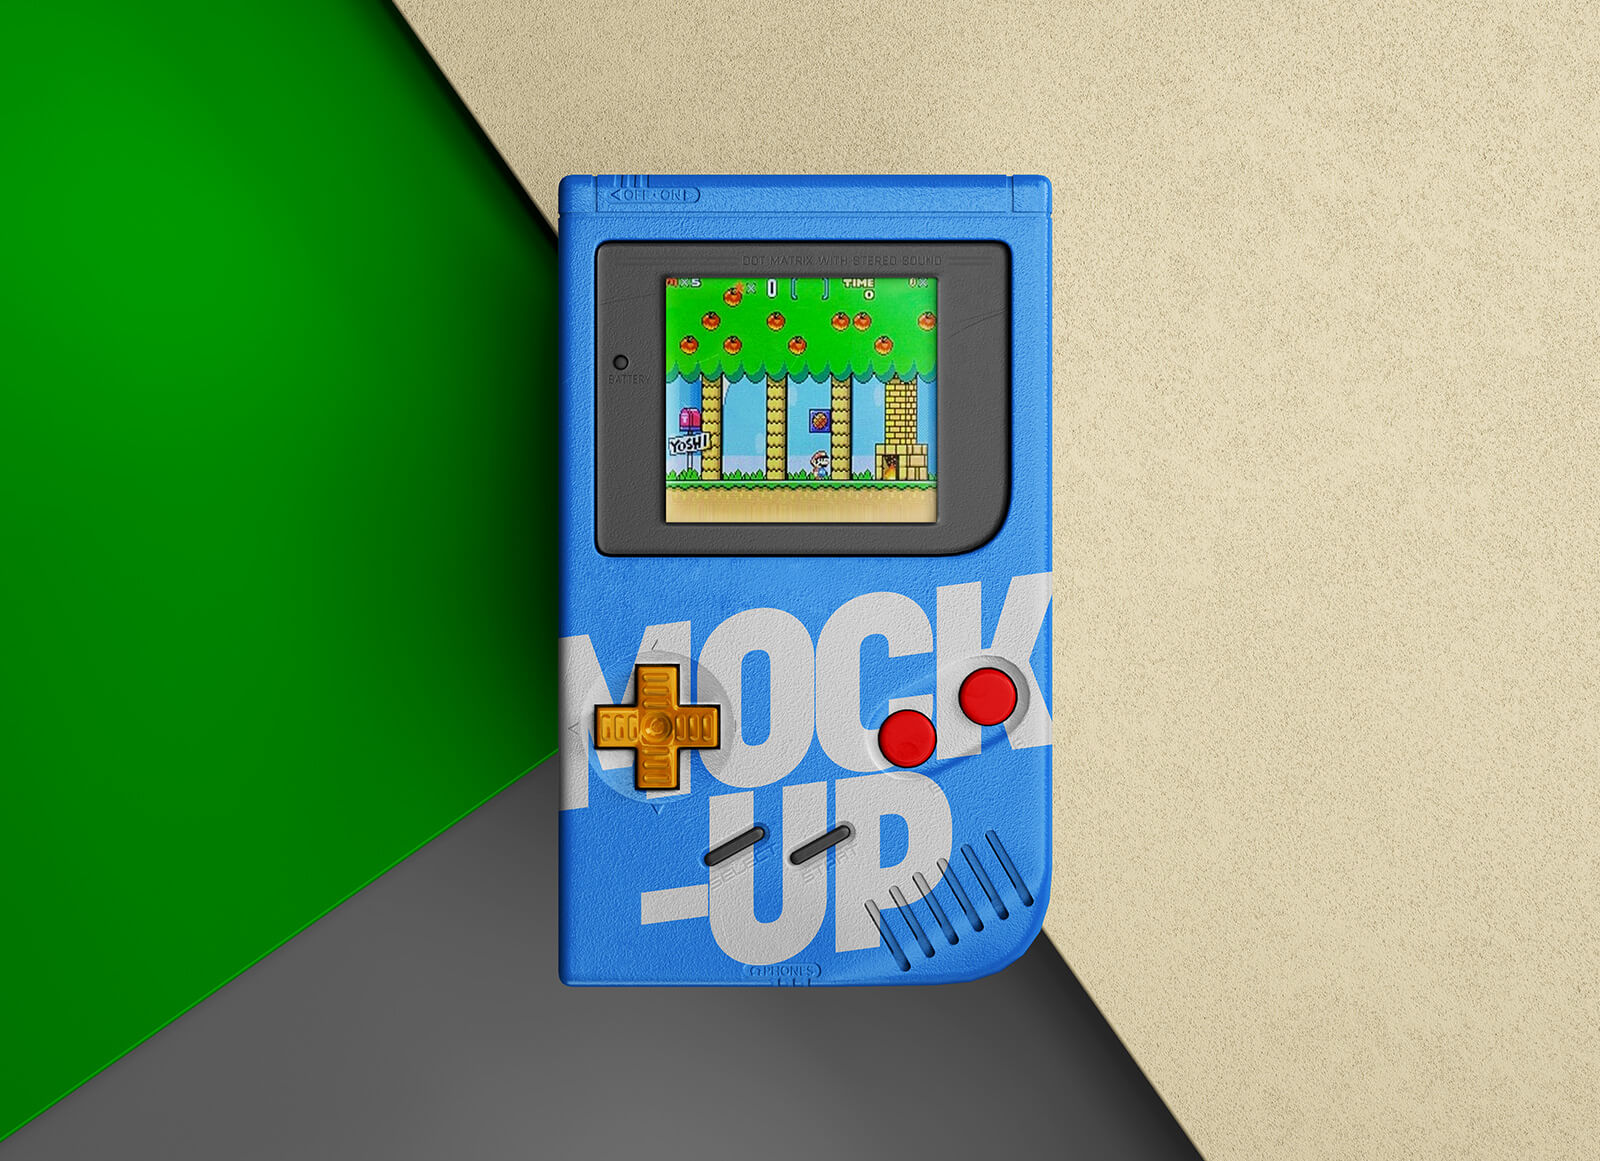 Free Gameboy Handheld Game Console Mockup PSD